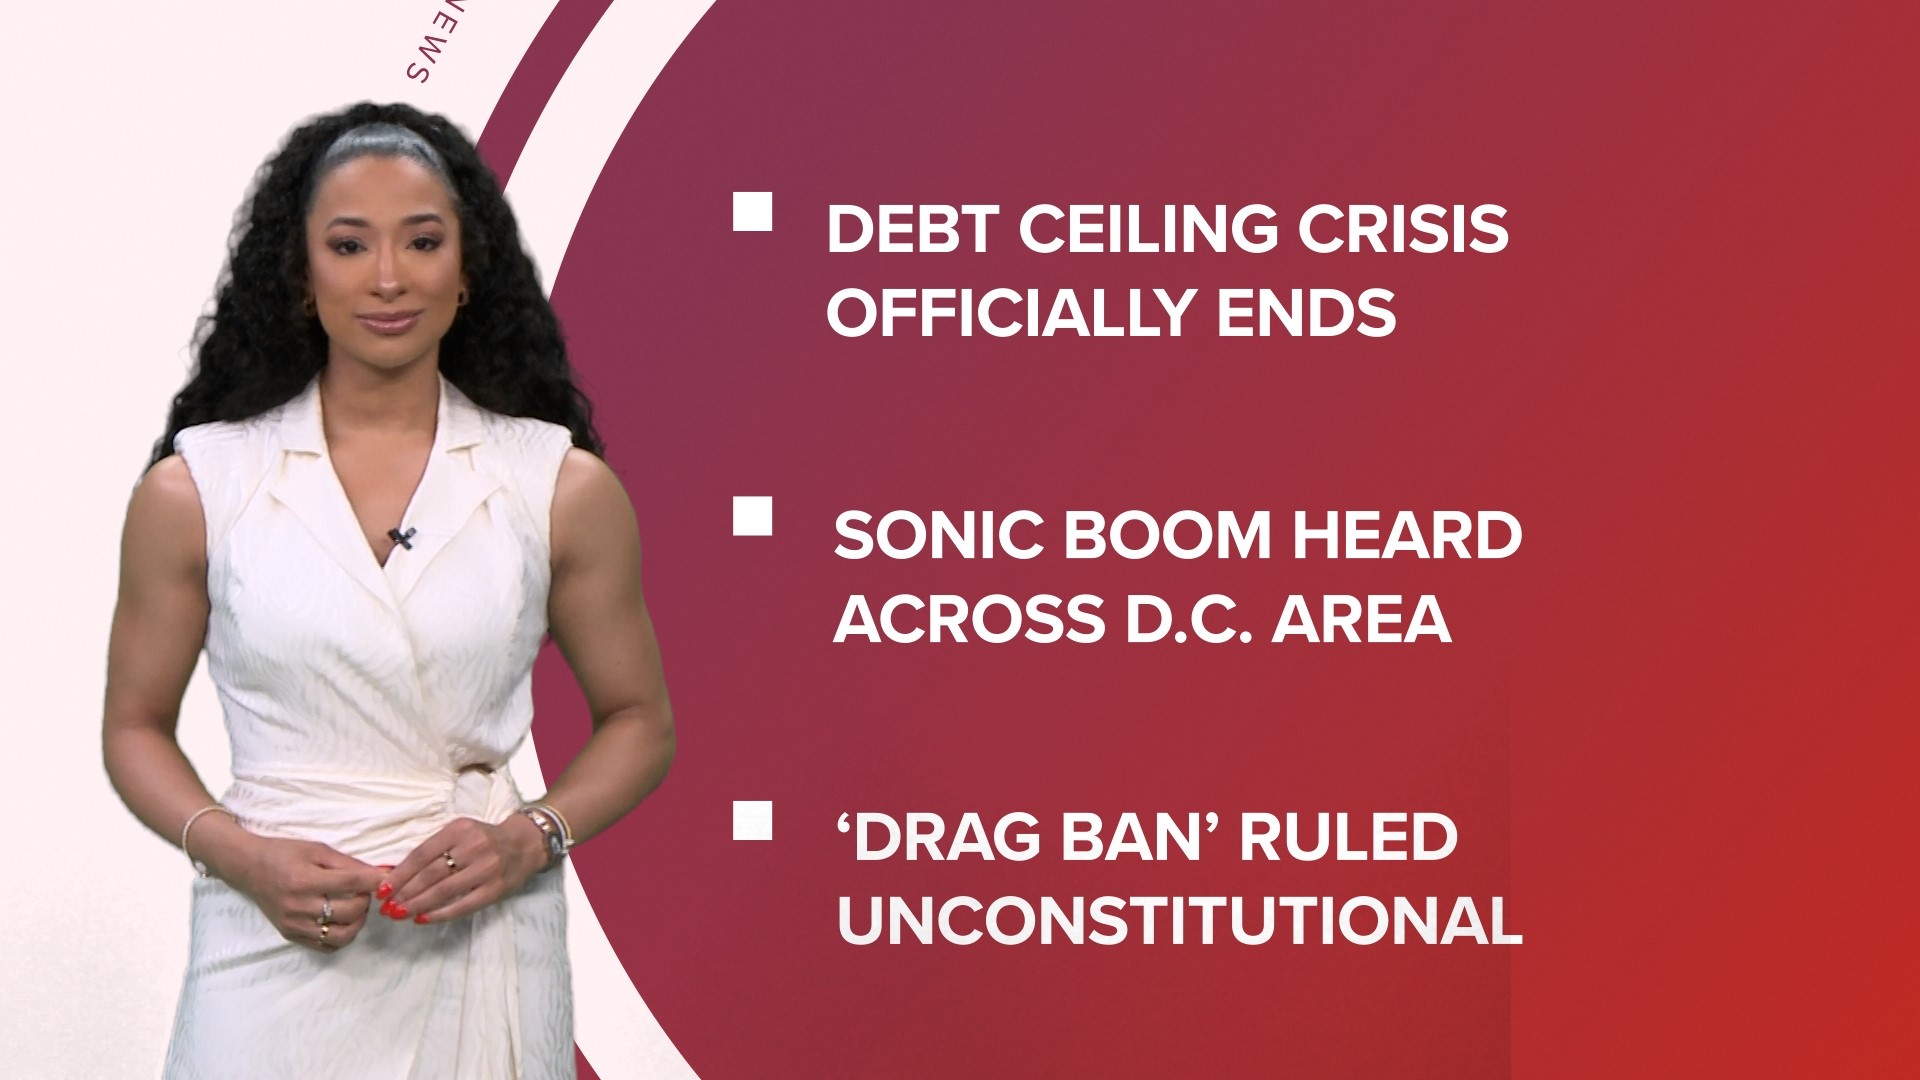 A look at what is happening in the news from the debt ceiling crisis being averted to a judge striking down Tennessee's anti-drag law.